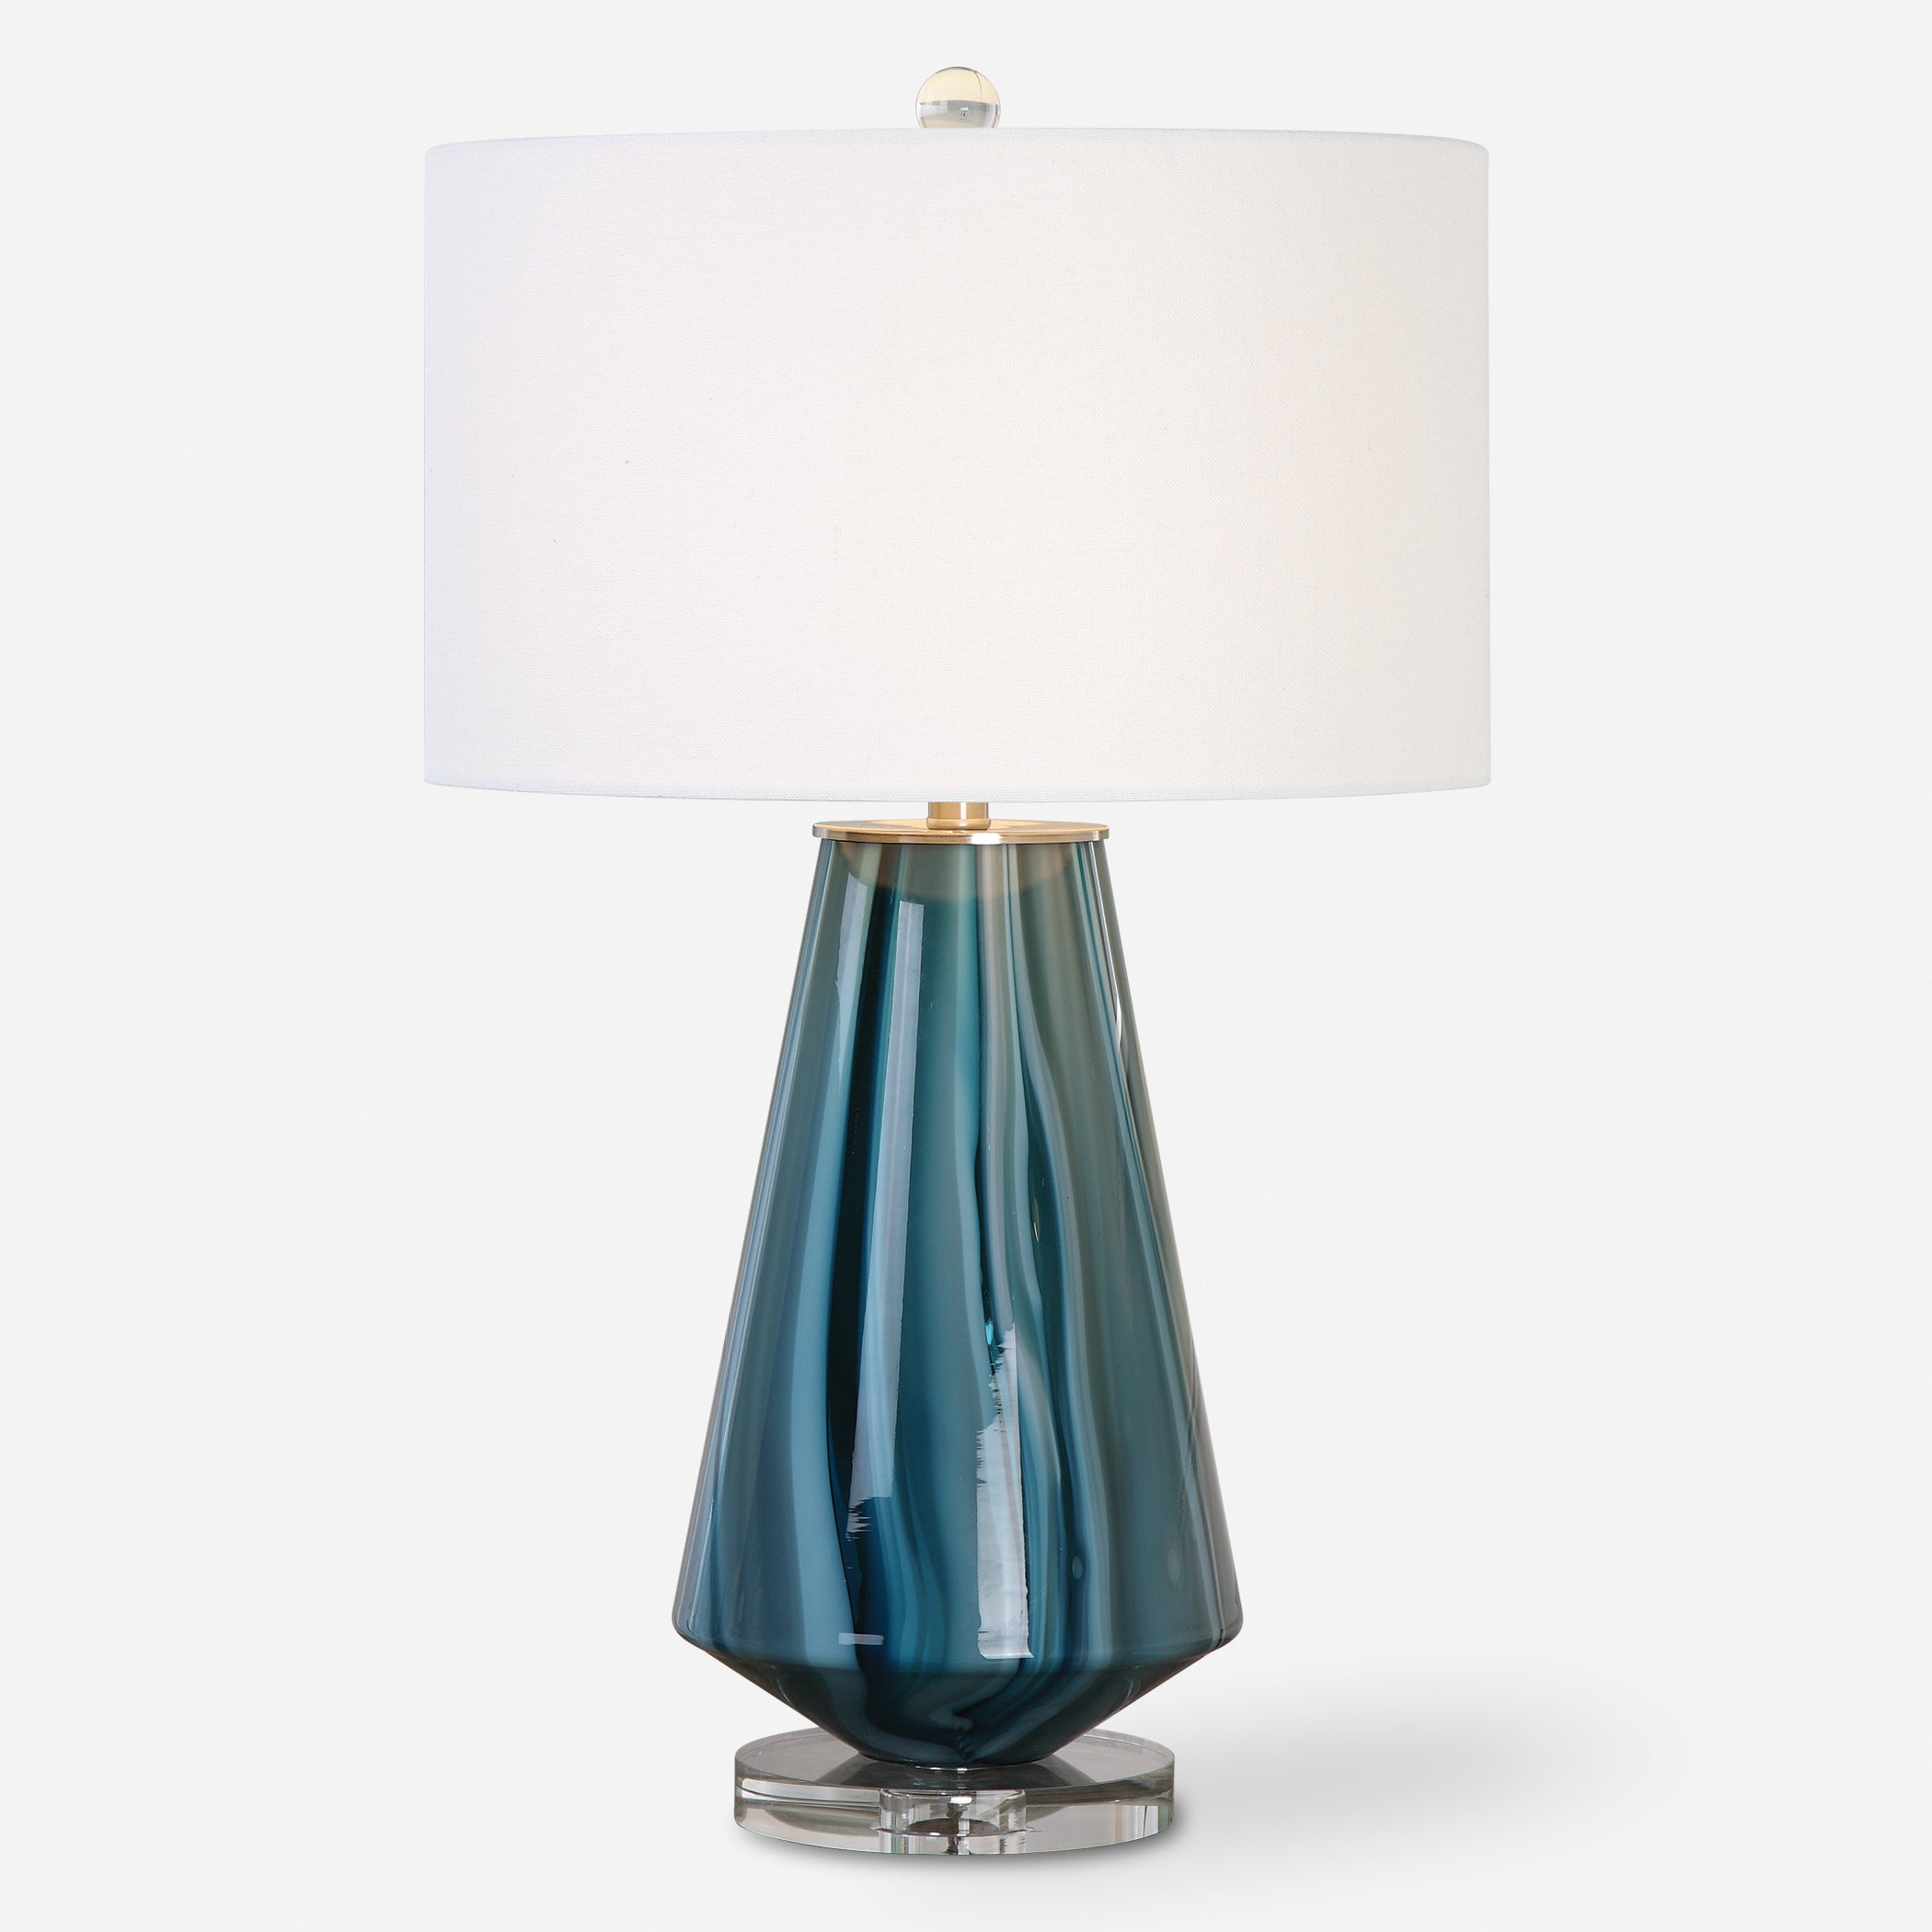 Uttermost Pescara Teal-Gray Glass Lamp Teal-Gray Glass Lamp Uttermost   